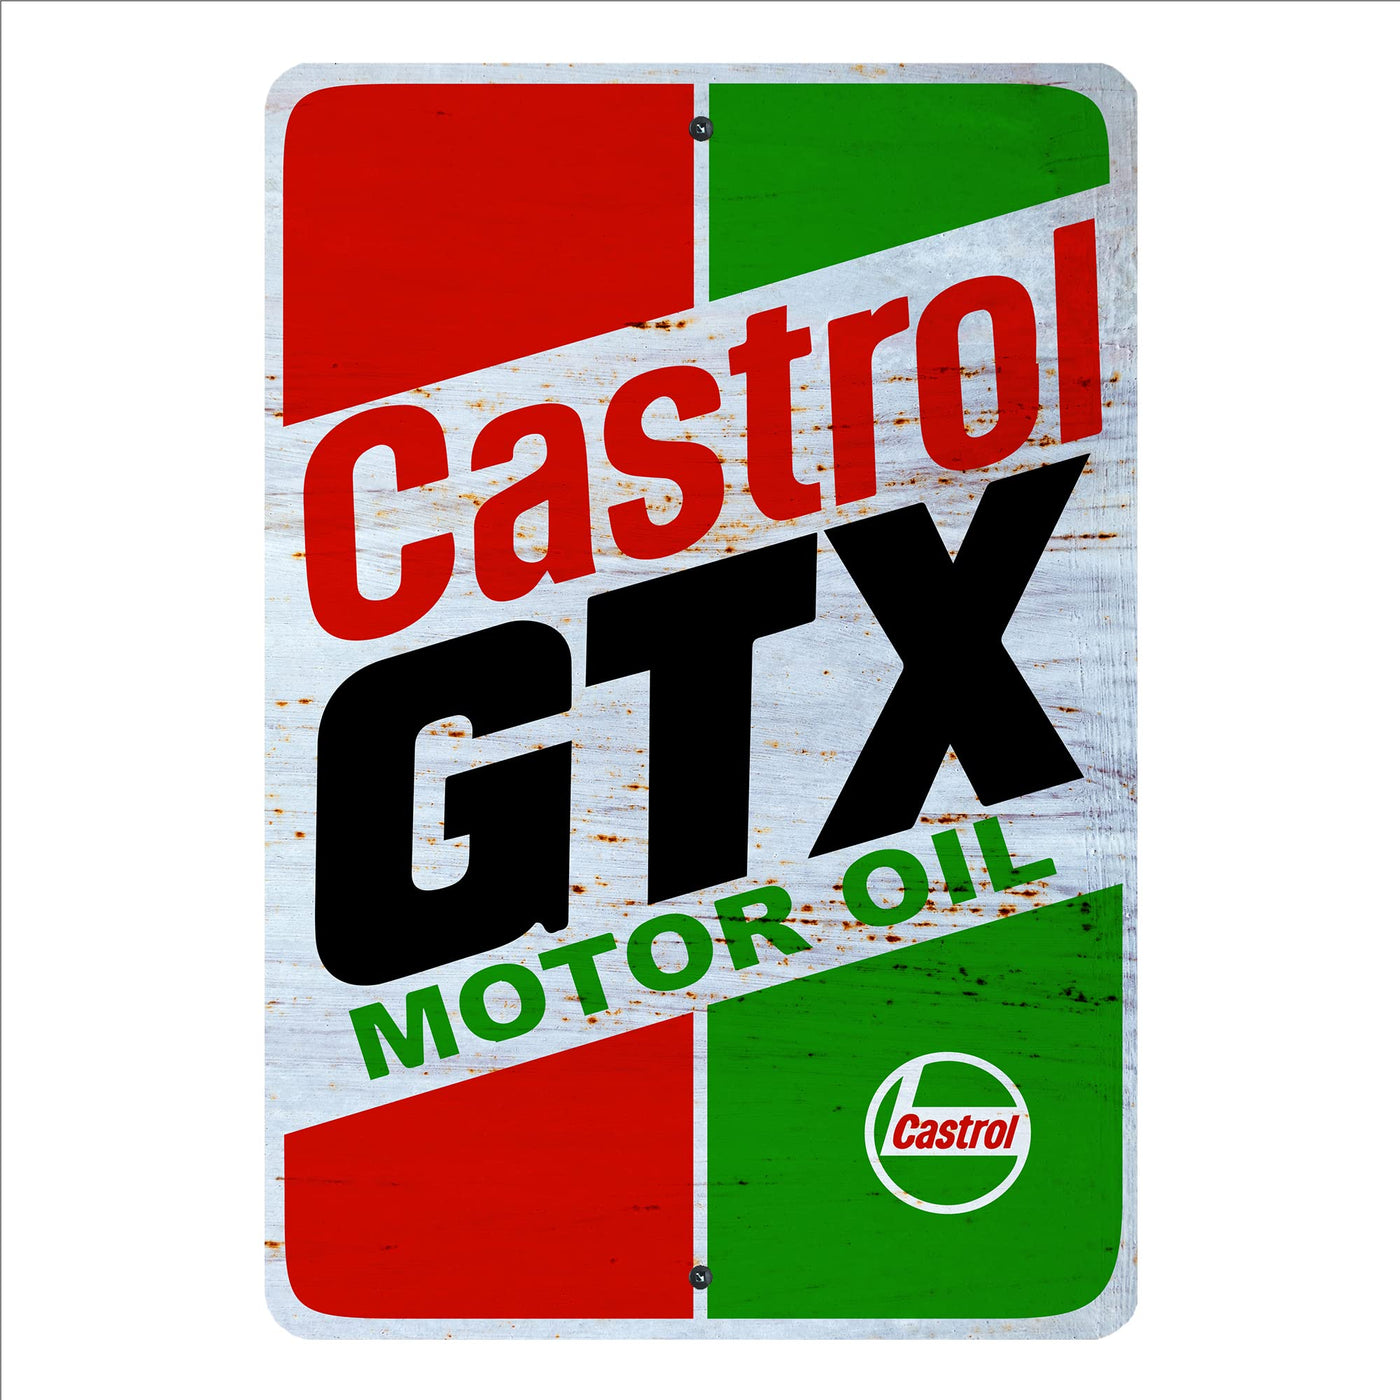 Vintage CastroI GTX Motor Oil Metal Signs Wall Art -8 x 12" Rustic Garage Sign for Bar, Man Cave, Shop - Retro Tin Sign -Gift for Home, Lodge, Cabin, Farmhouse, Outdoor Decor & Mechanic Accessories!